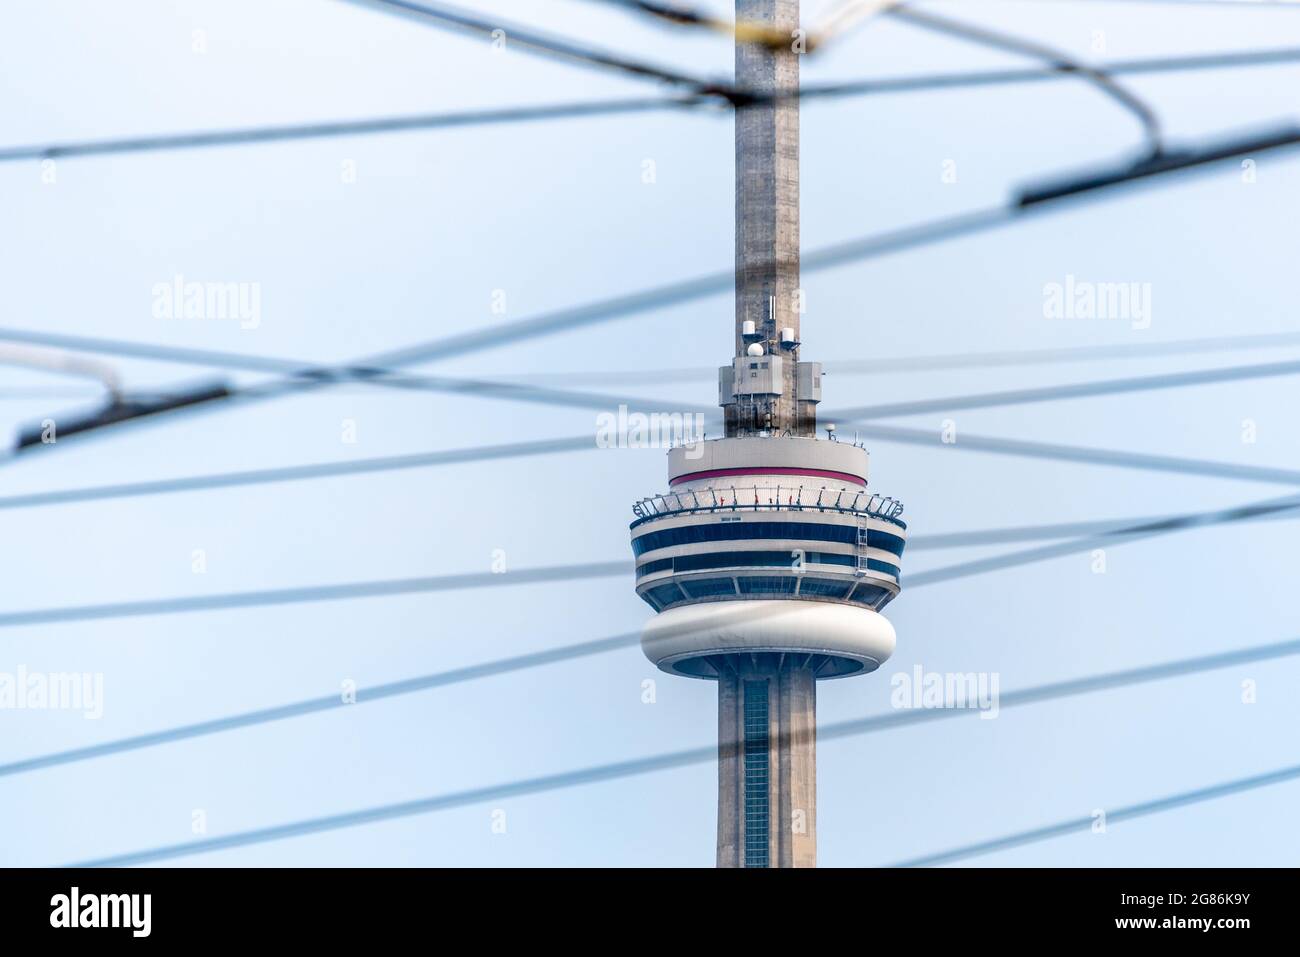 CN tower framed in streetcar cables, toronto, canada Stock Photo